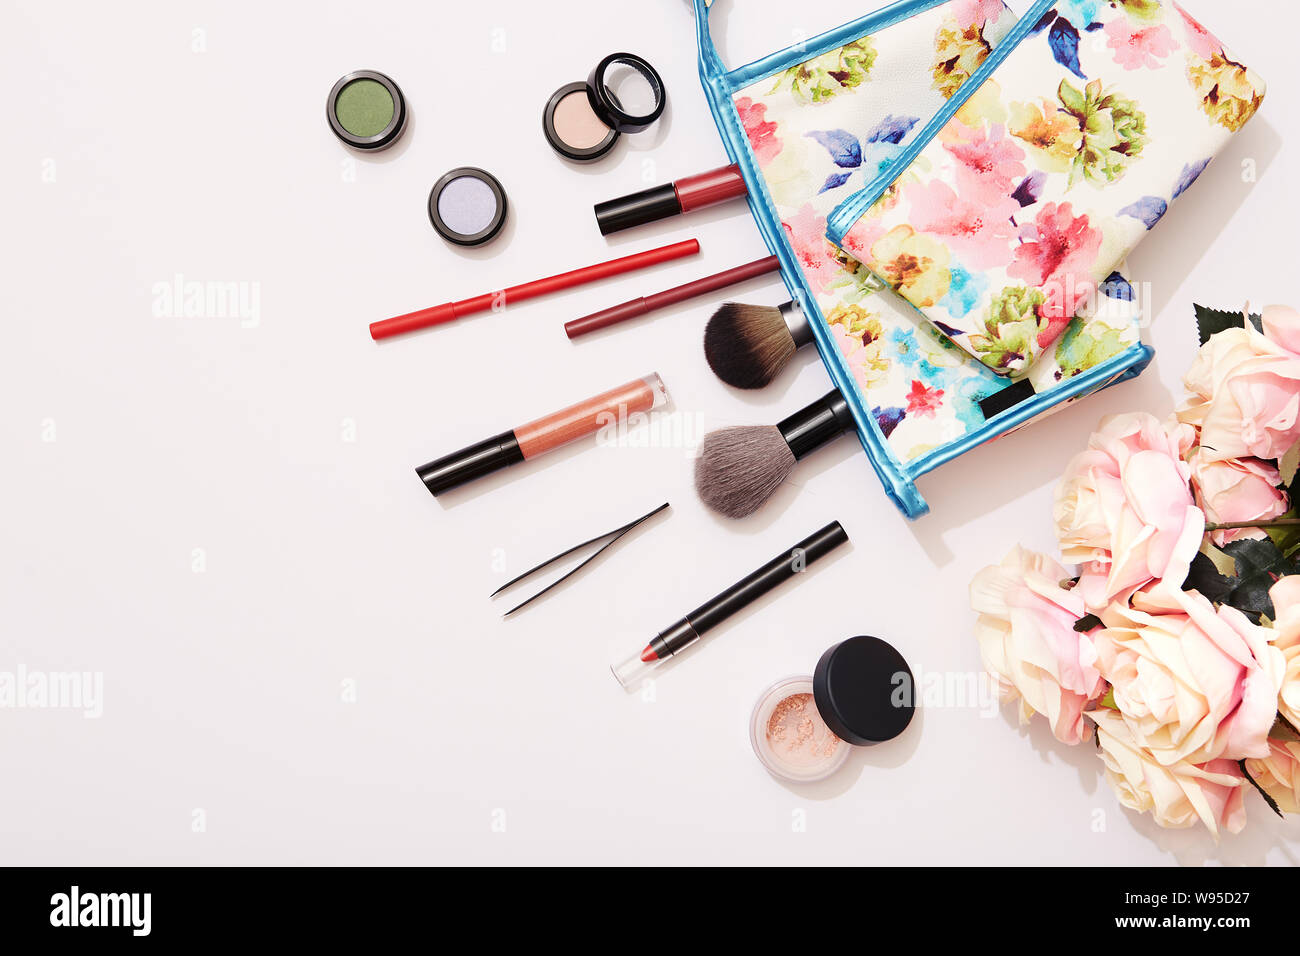 Summer beauty makeup products on white background with roses Stock Photo